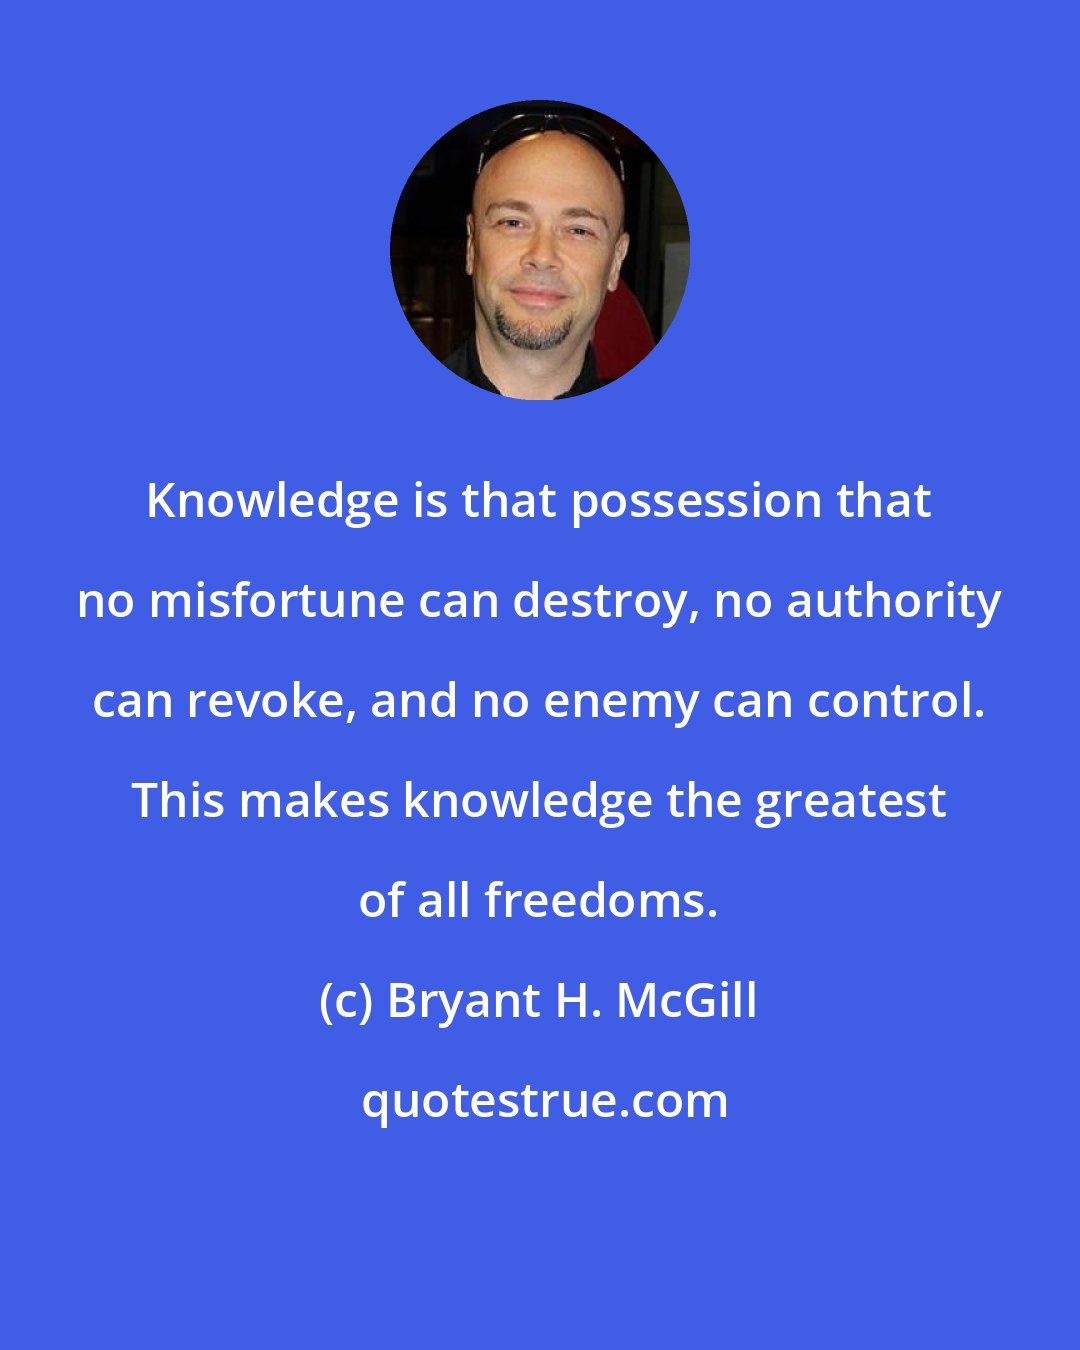 Bryant H. McGill: Knowledge is that possession that no misfortune can destroy, no authority can revoke, and no enemy can control. This makes knowledge the greatest of all freedoms.